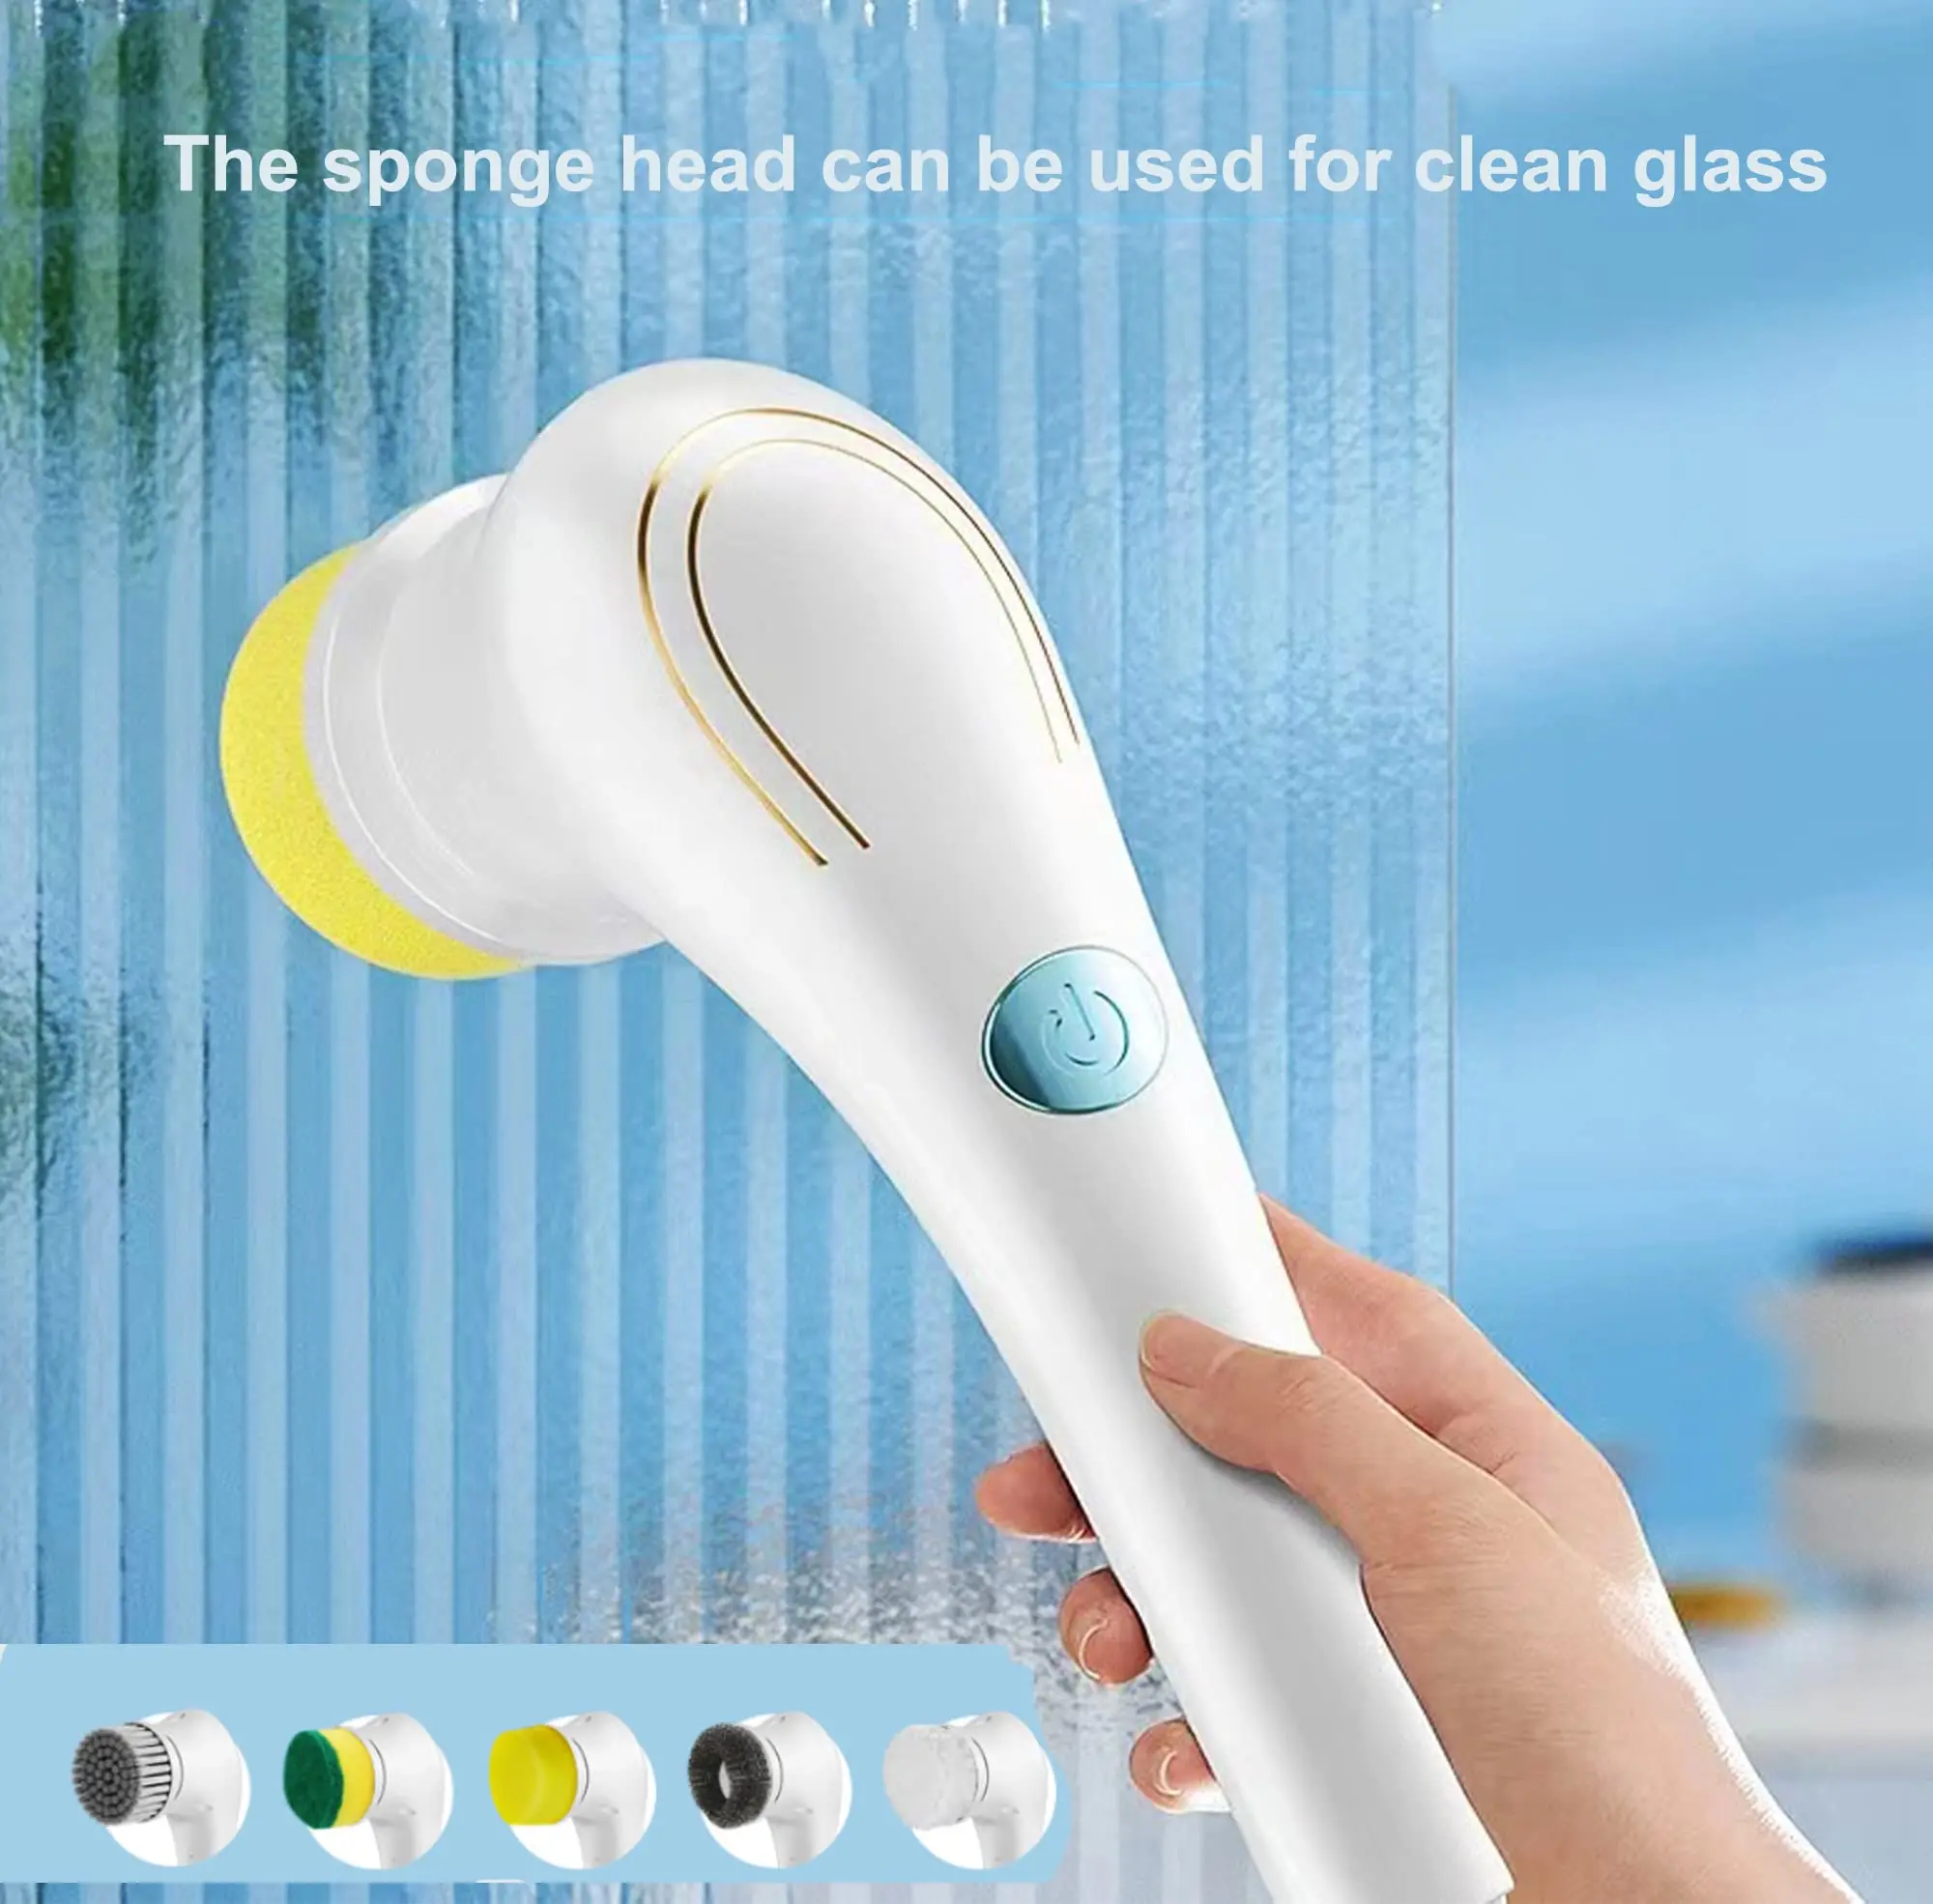 S66279b19b0a349c48225539ba7ad5b95g USB Rechargeable 360° Electric Spin Scrubber Cordless Handheld Scrubber with 5 Replaceable Brush Heads, Electric Floor Scrubber